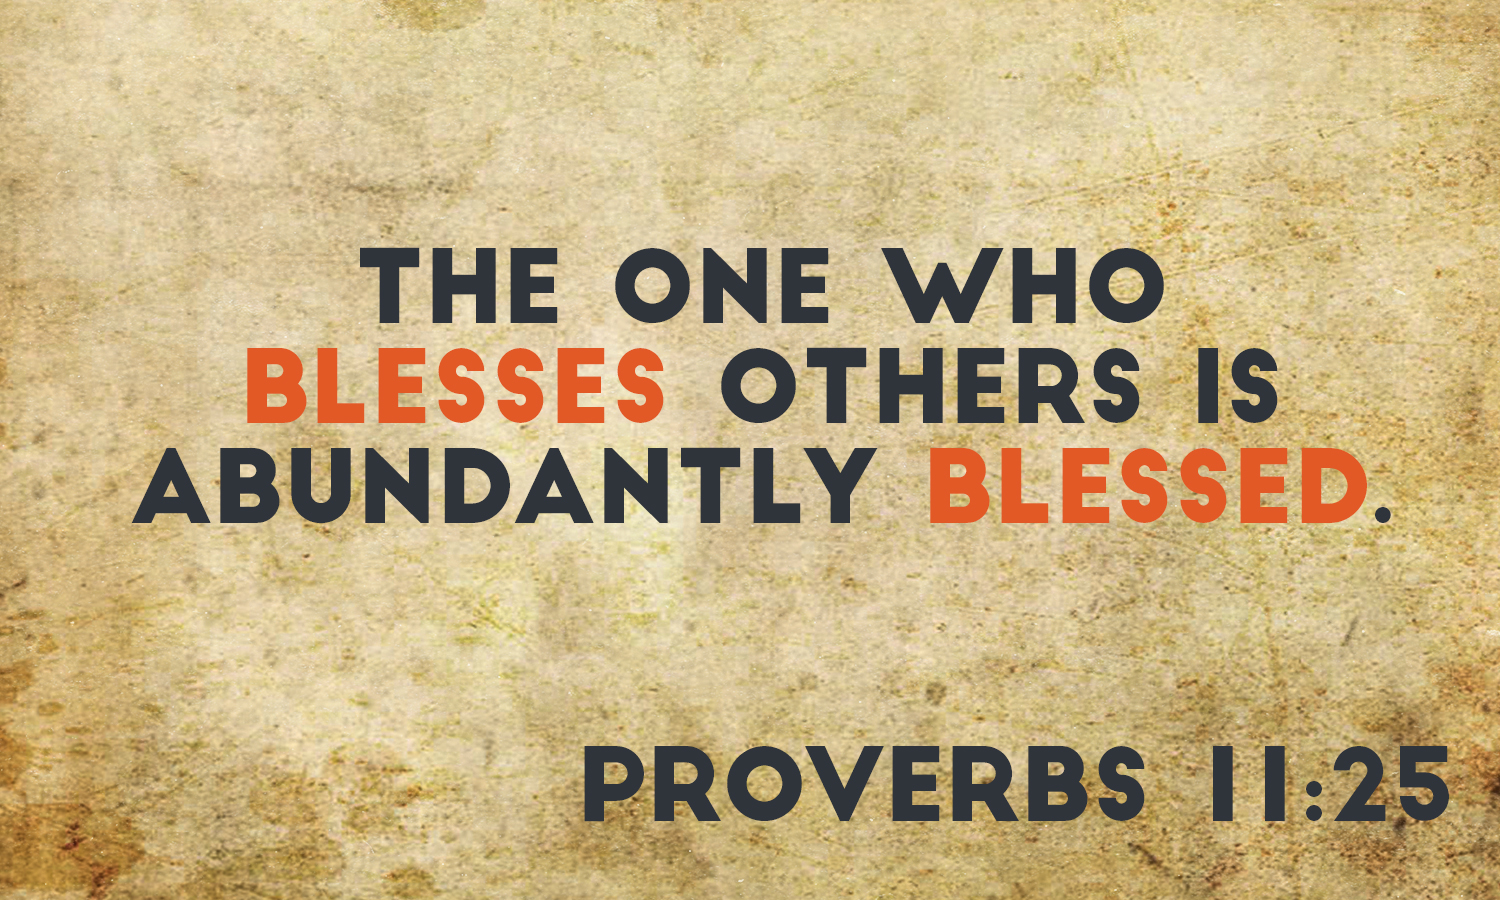 Proverbs 11:25 The one who blesses others is abundantly blessed.